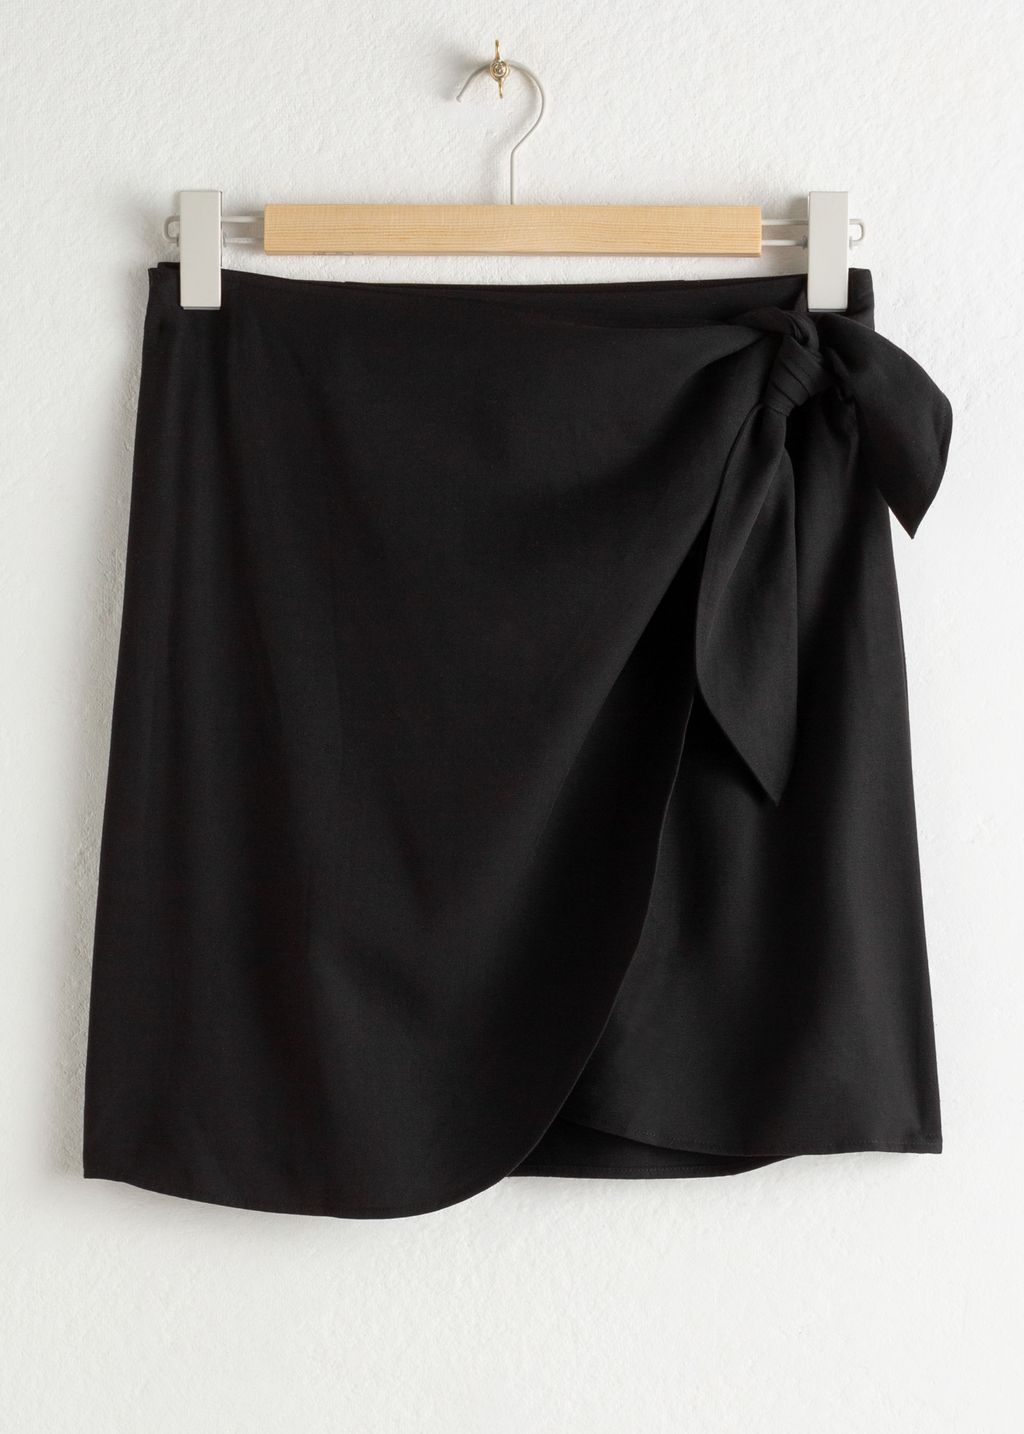 These Will Be the Most Popular Skirt Trends of 2021 | Who What Wear